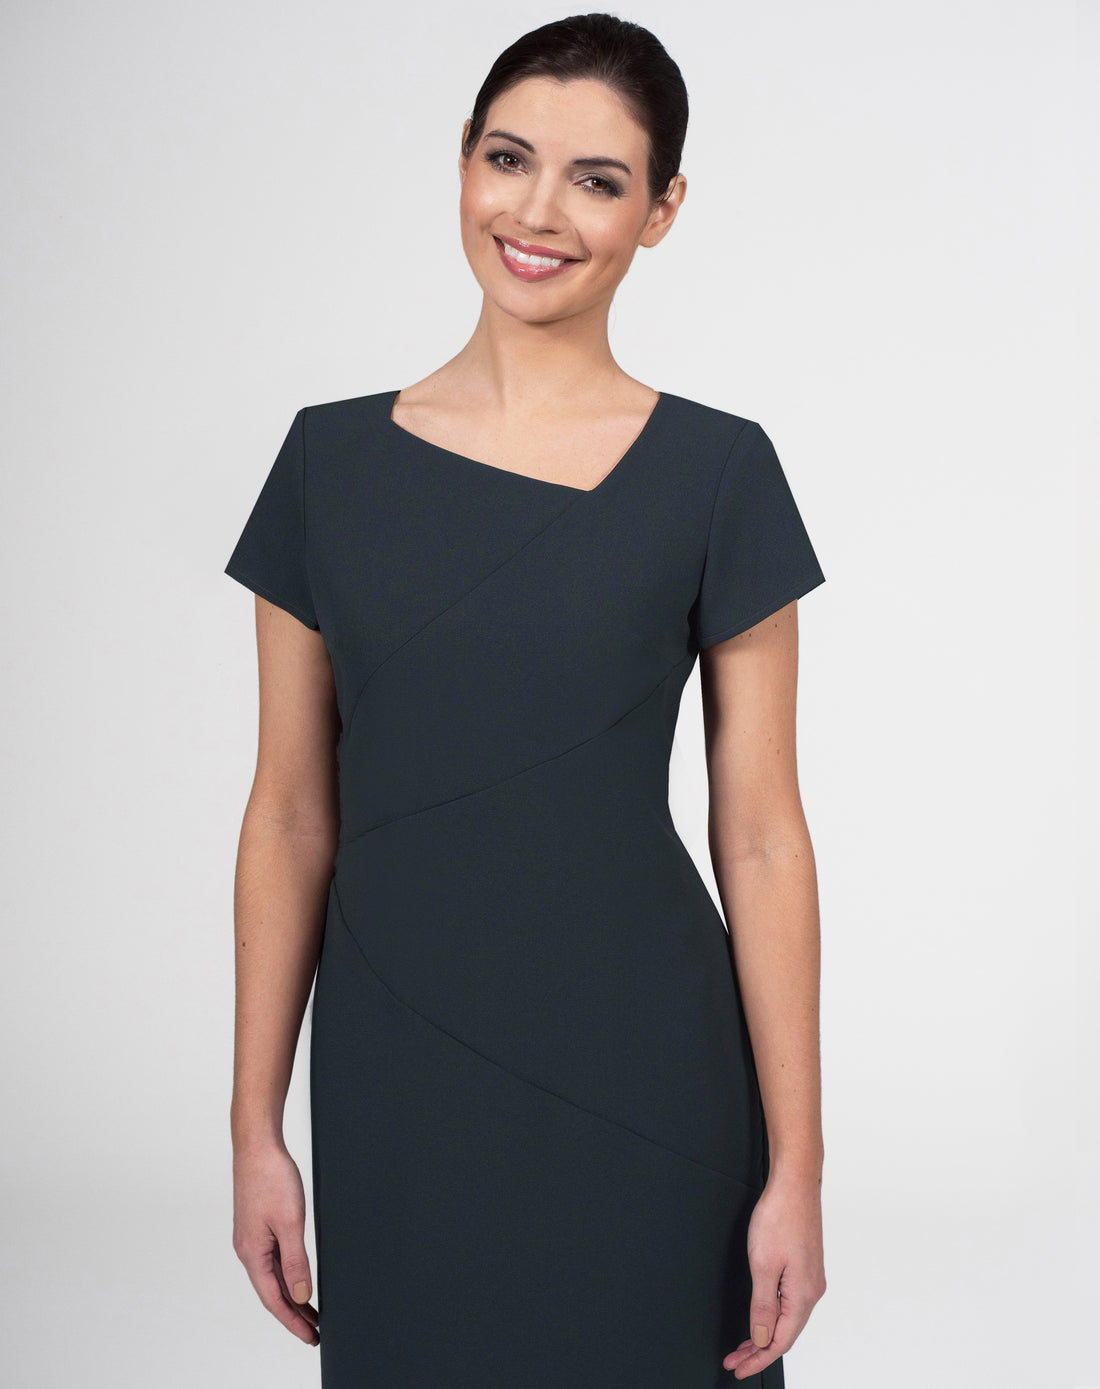 CR935 - Crepe Dress with flattering seam detail and angular neckline in Luxury Crepe